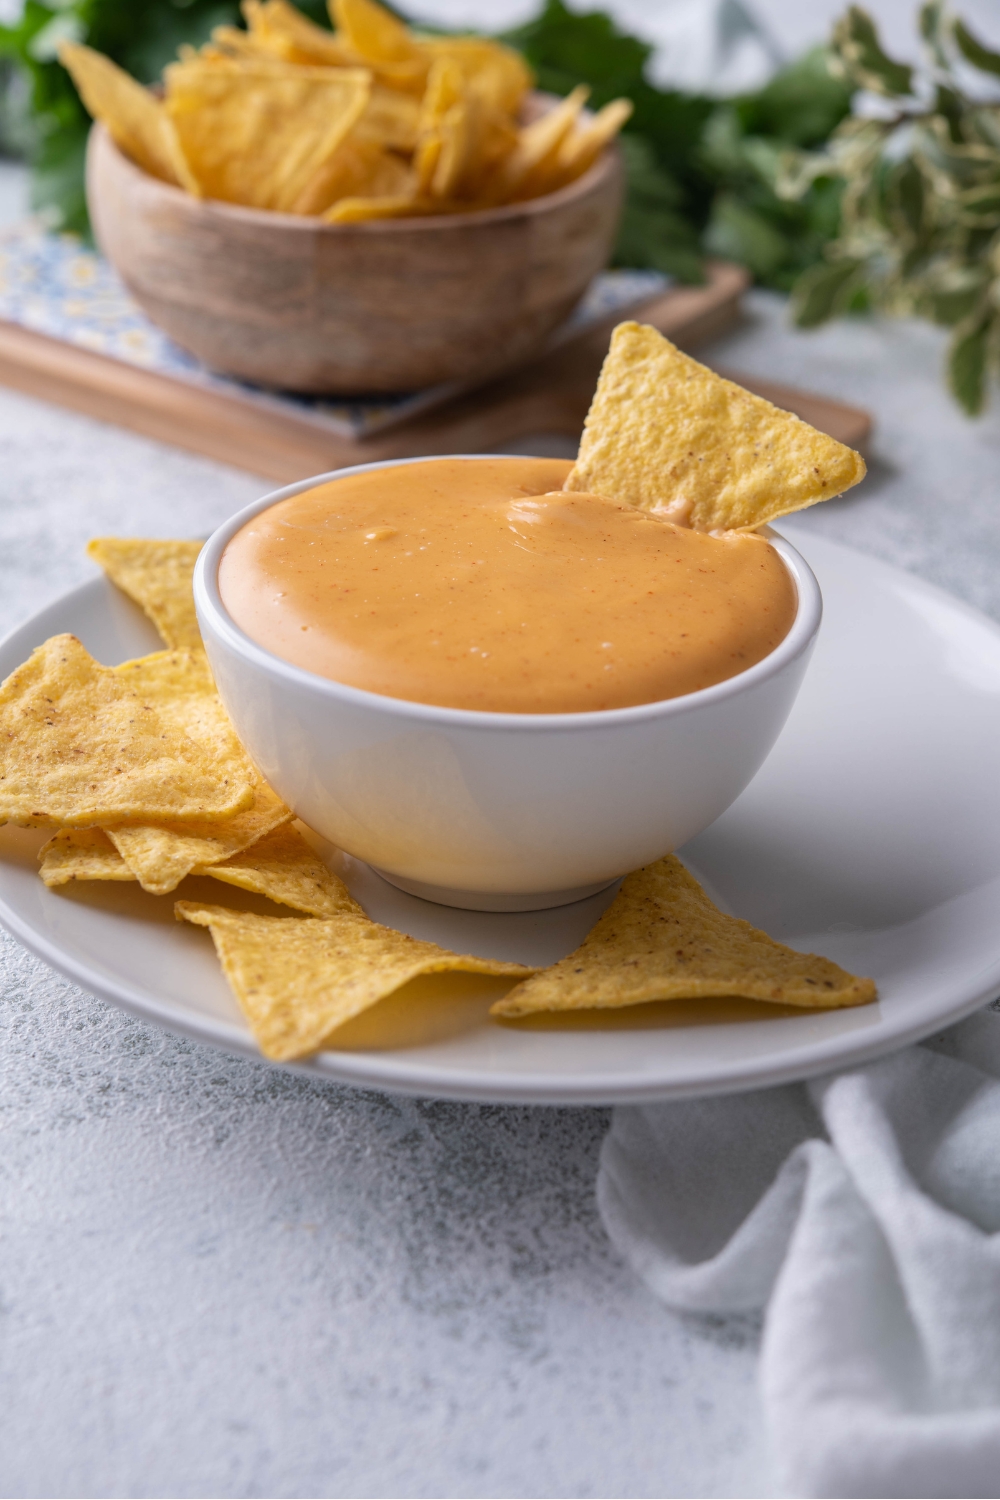 A tortilla chip sticking out of a bowl of Taco Bell nacho cheese sauce. The bowl is atop a plate filled with tortilla chips.